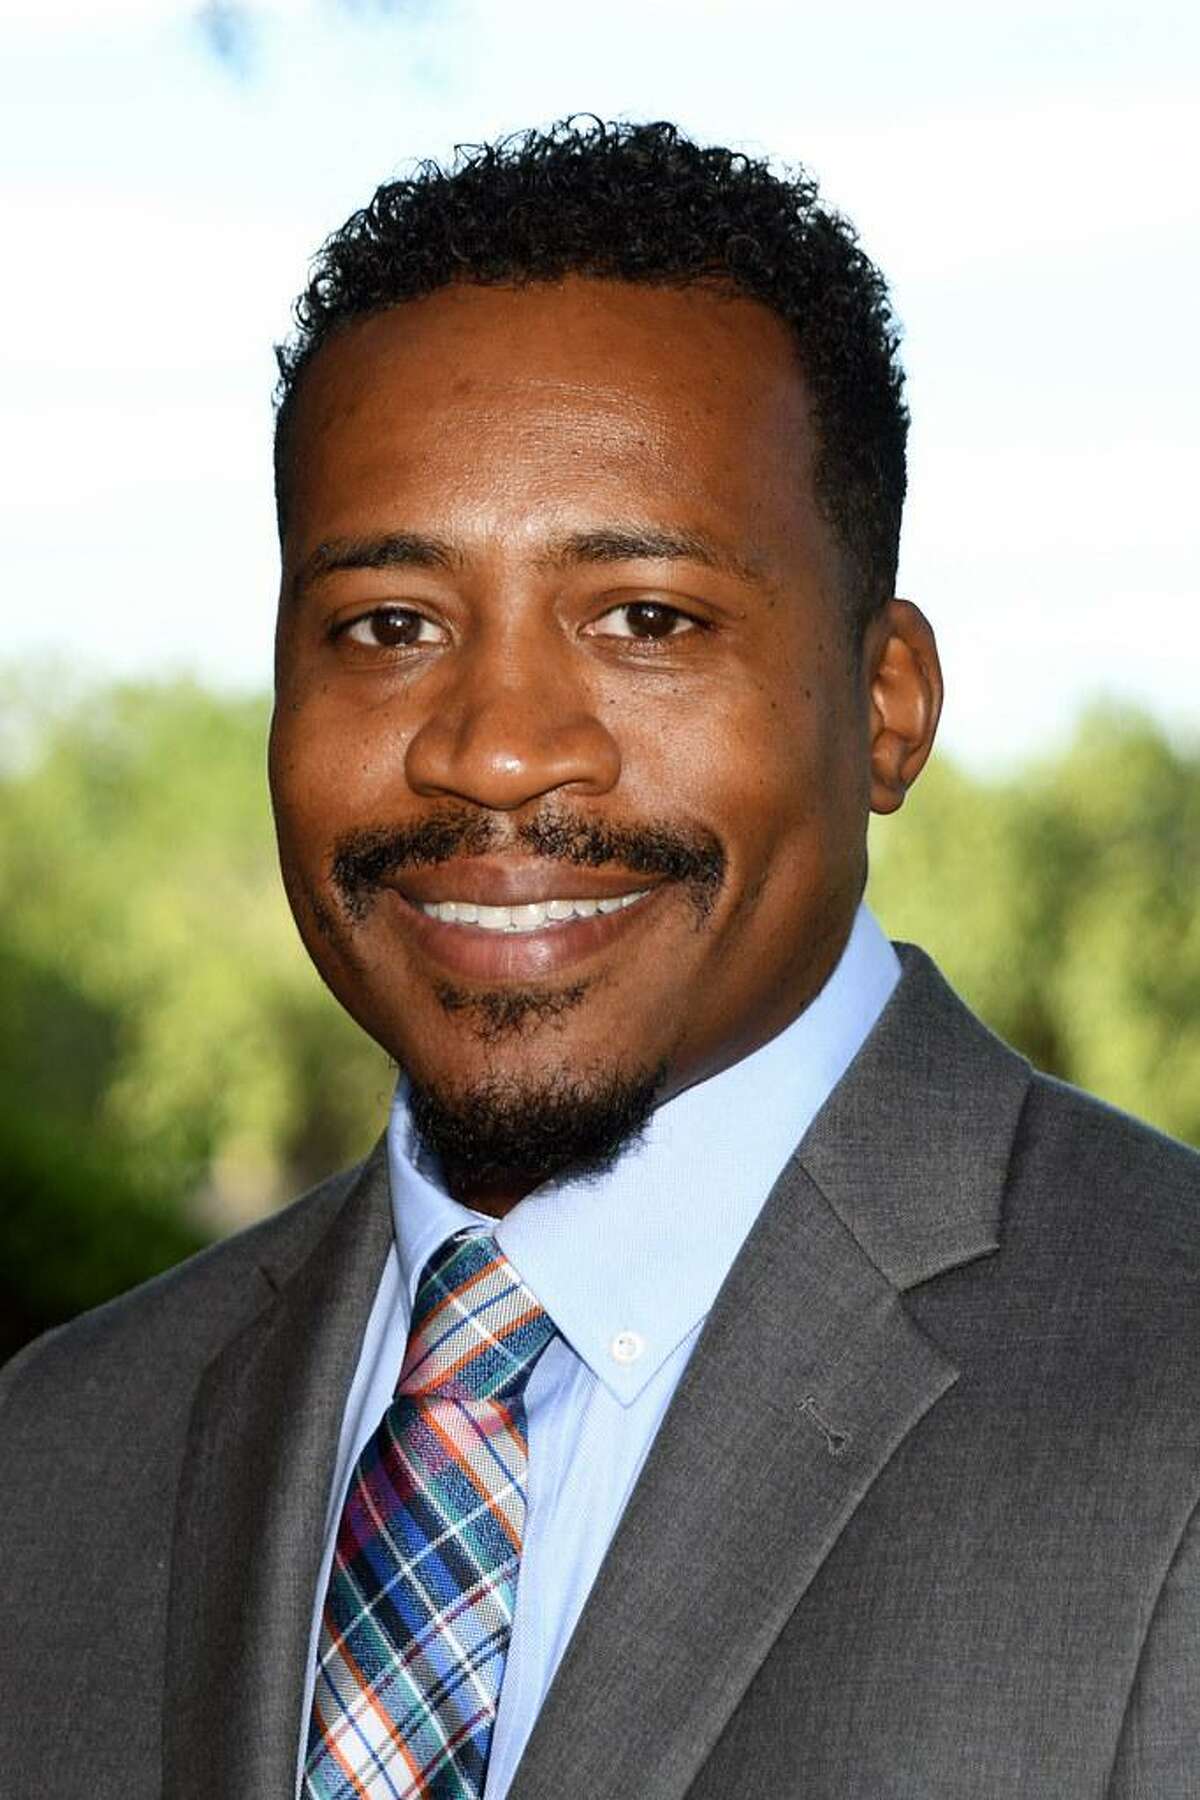 Robert Cage has been named executive director of the San Jacinto College Foundation.